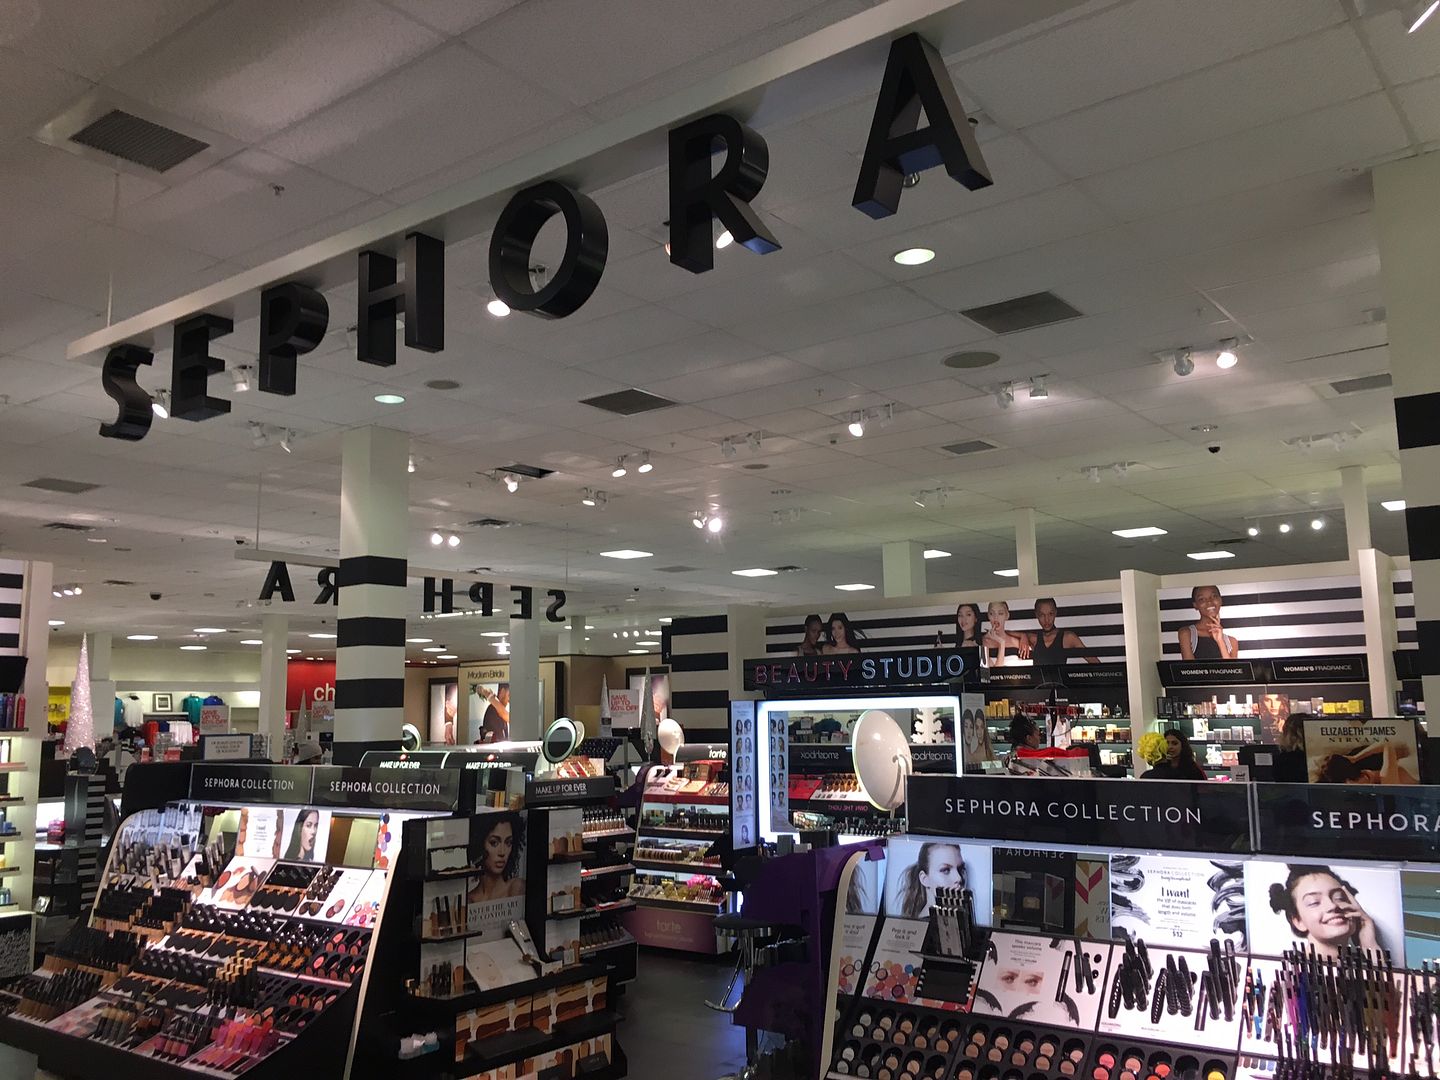 Sephora in JCPenney: Sephora Collection